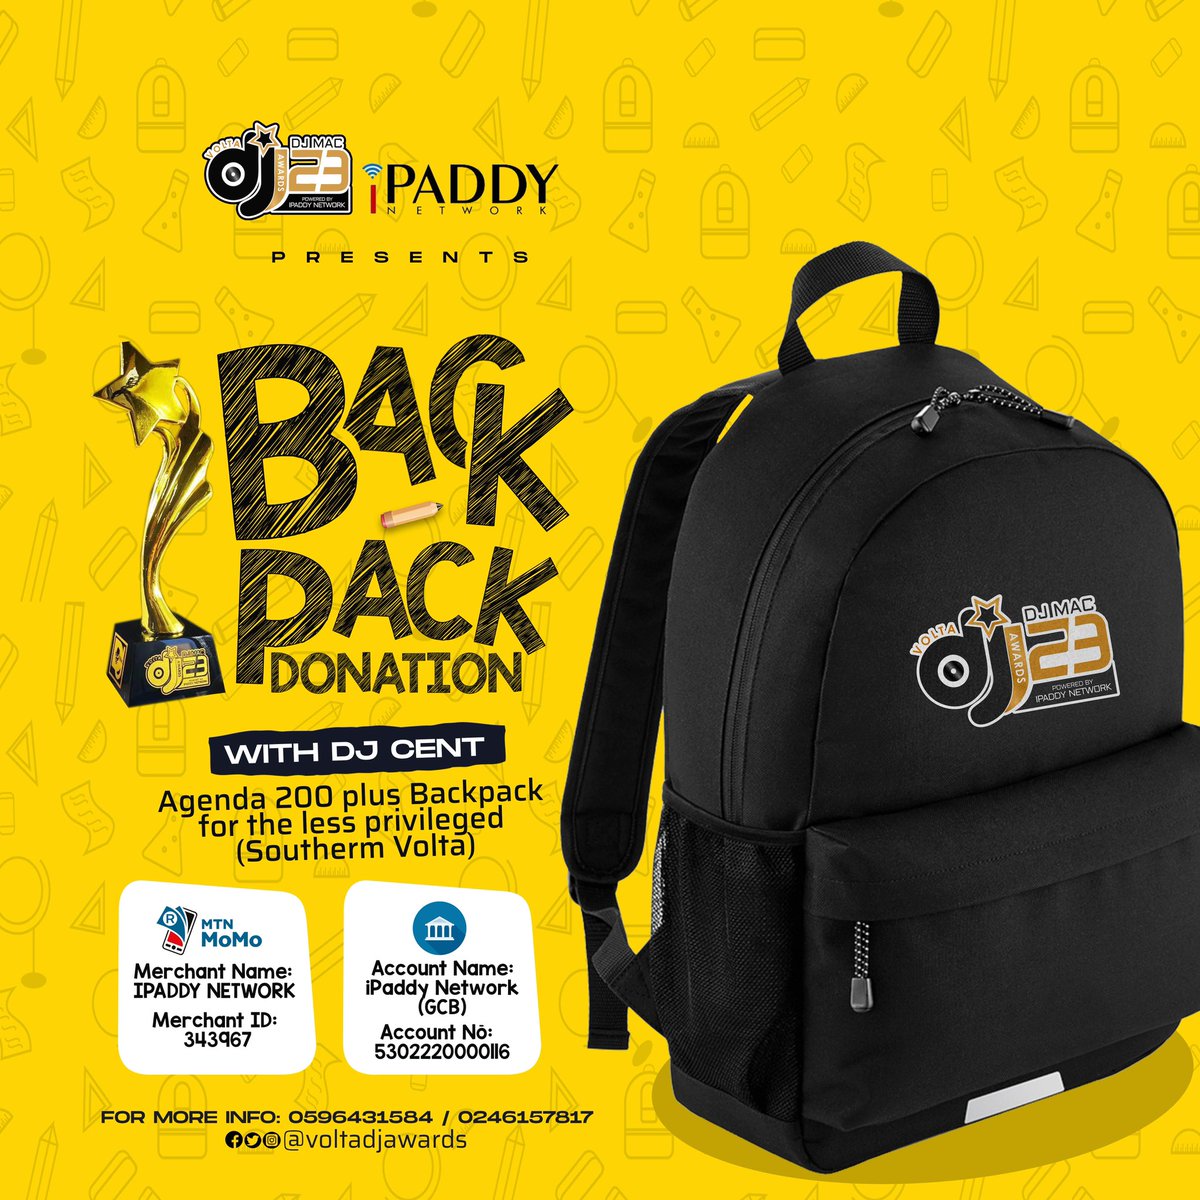 BACKPACK DONATION 
As part of duty to the community of the ultimate winner of DJ MAC VOLTA DJ AWARDS, the scheme is embarking on a BackPack Donation to pupils or school children in the zone(SOUTHERN) of this year’s winner.

#LetTheMusicPlay #VDJA23 #backpackwithDJCent